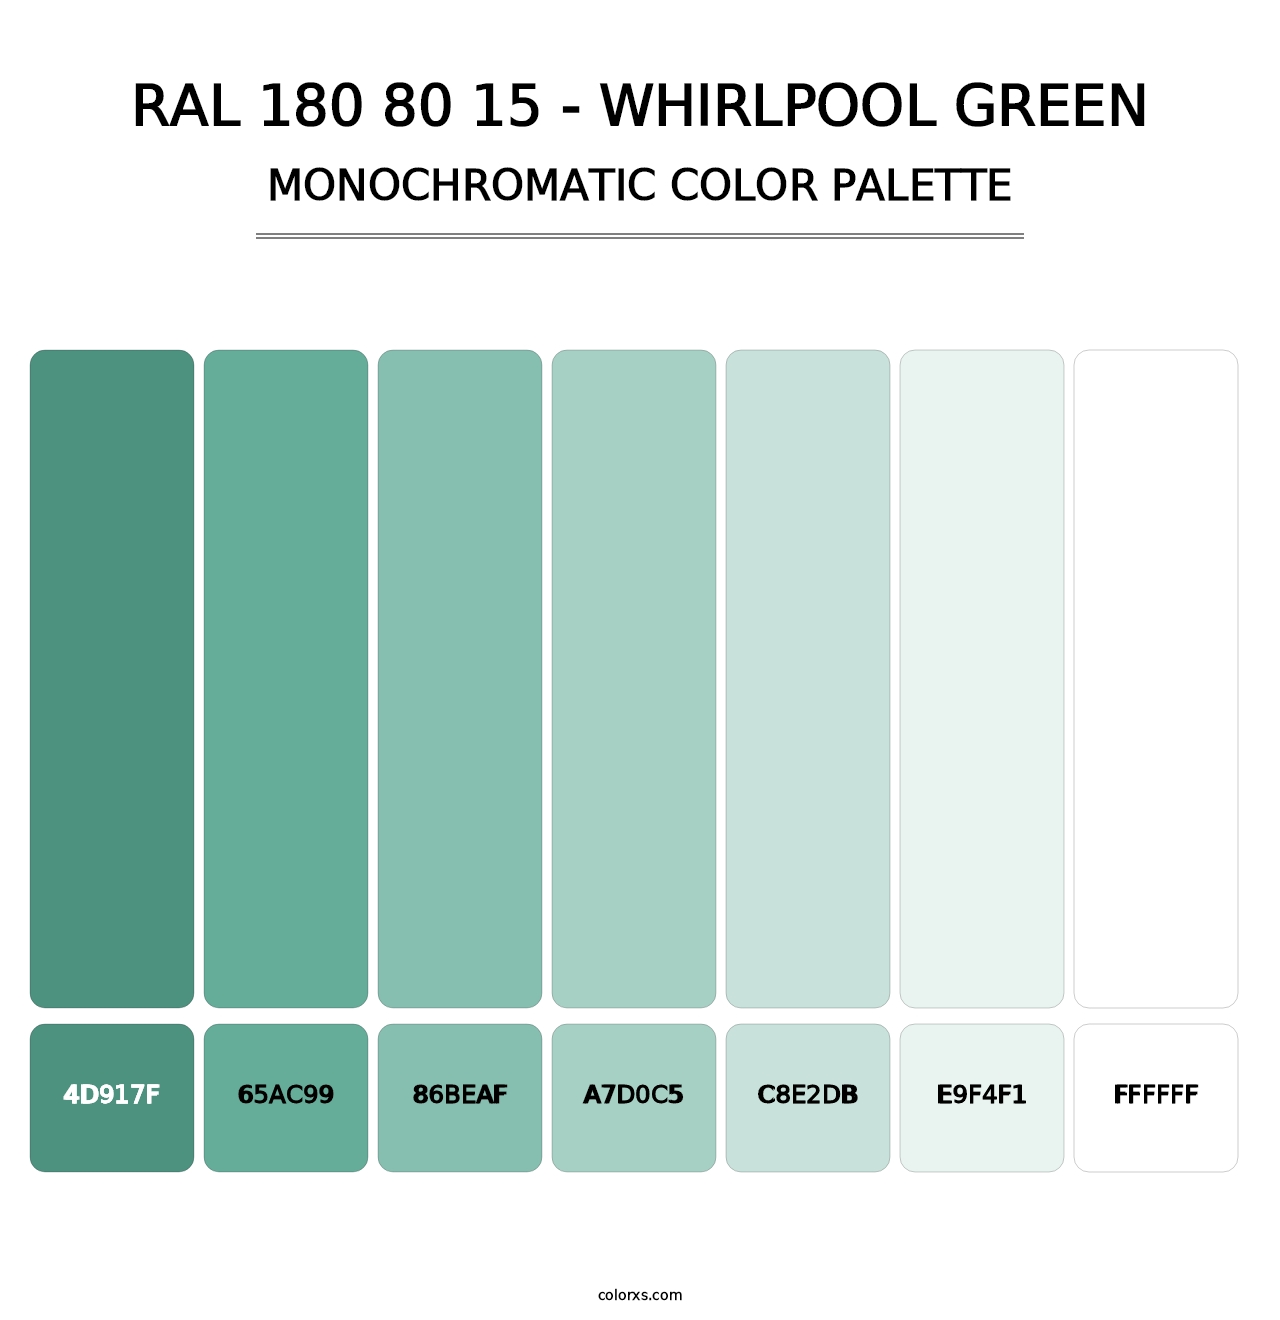 RAL 180 80 15 - Whirlpool Green - Monochromatic Color Palette